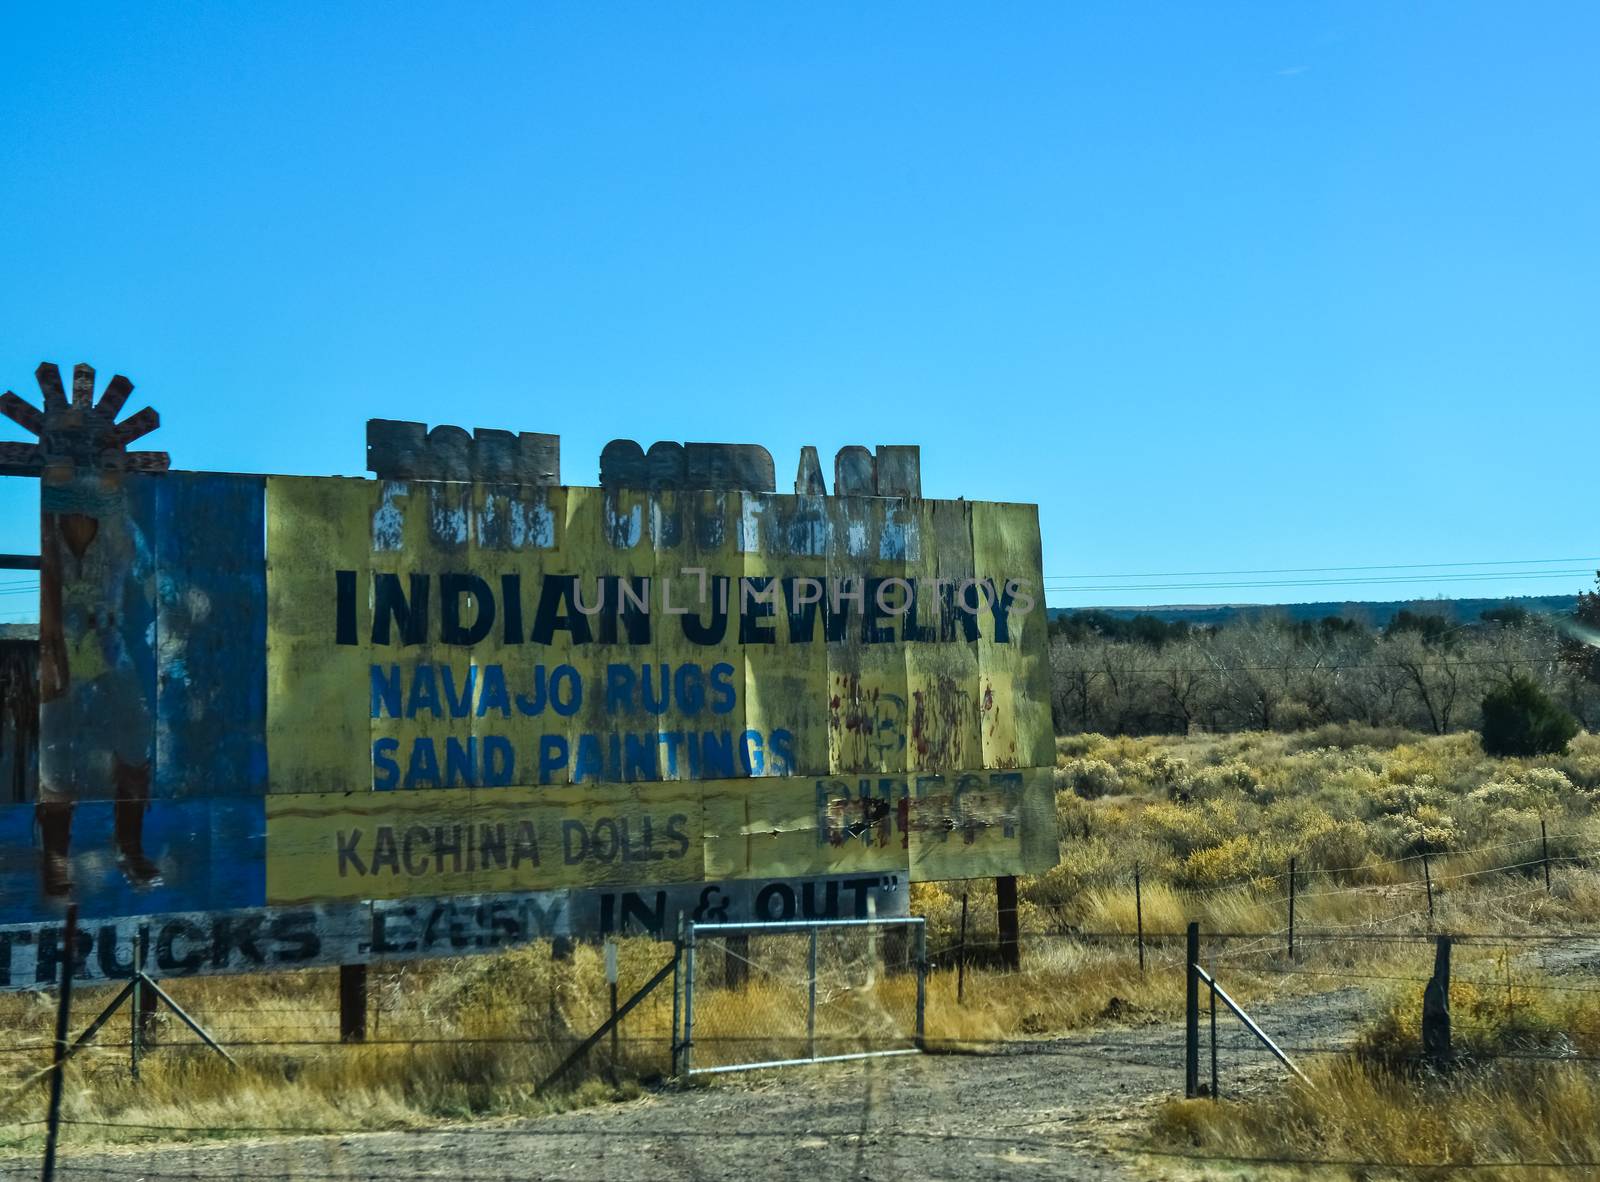 USA, ARIZONA - NOVEMBER 17, 2019:  old advertising signs along a road on an Indian reservation in a suburb of Phoenix, Arizona